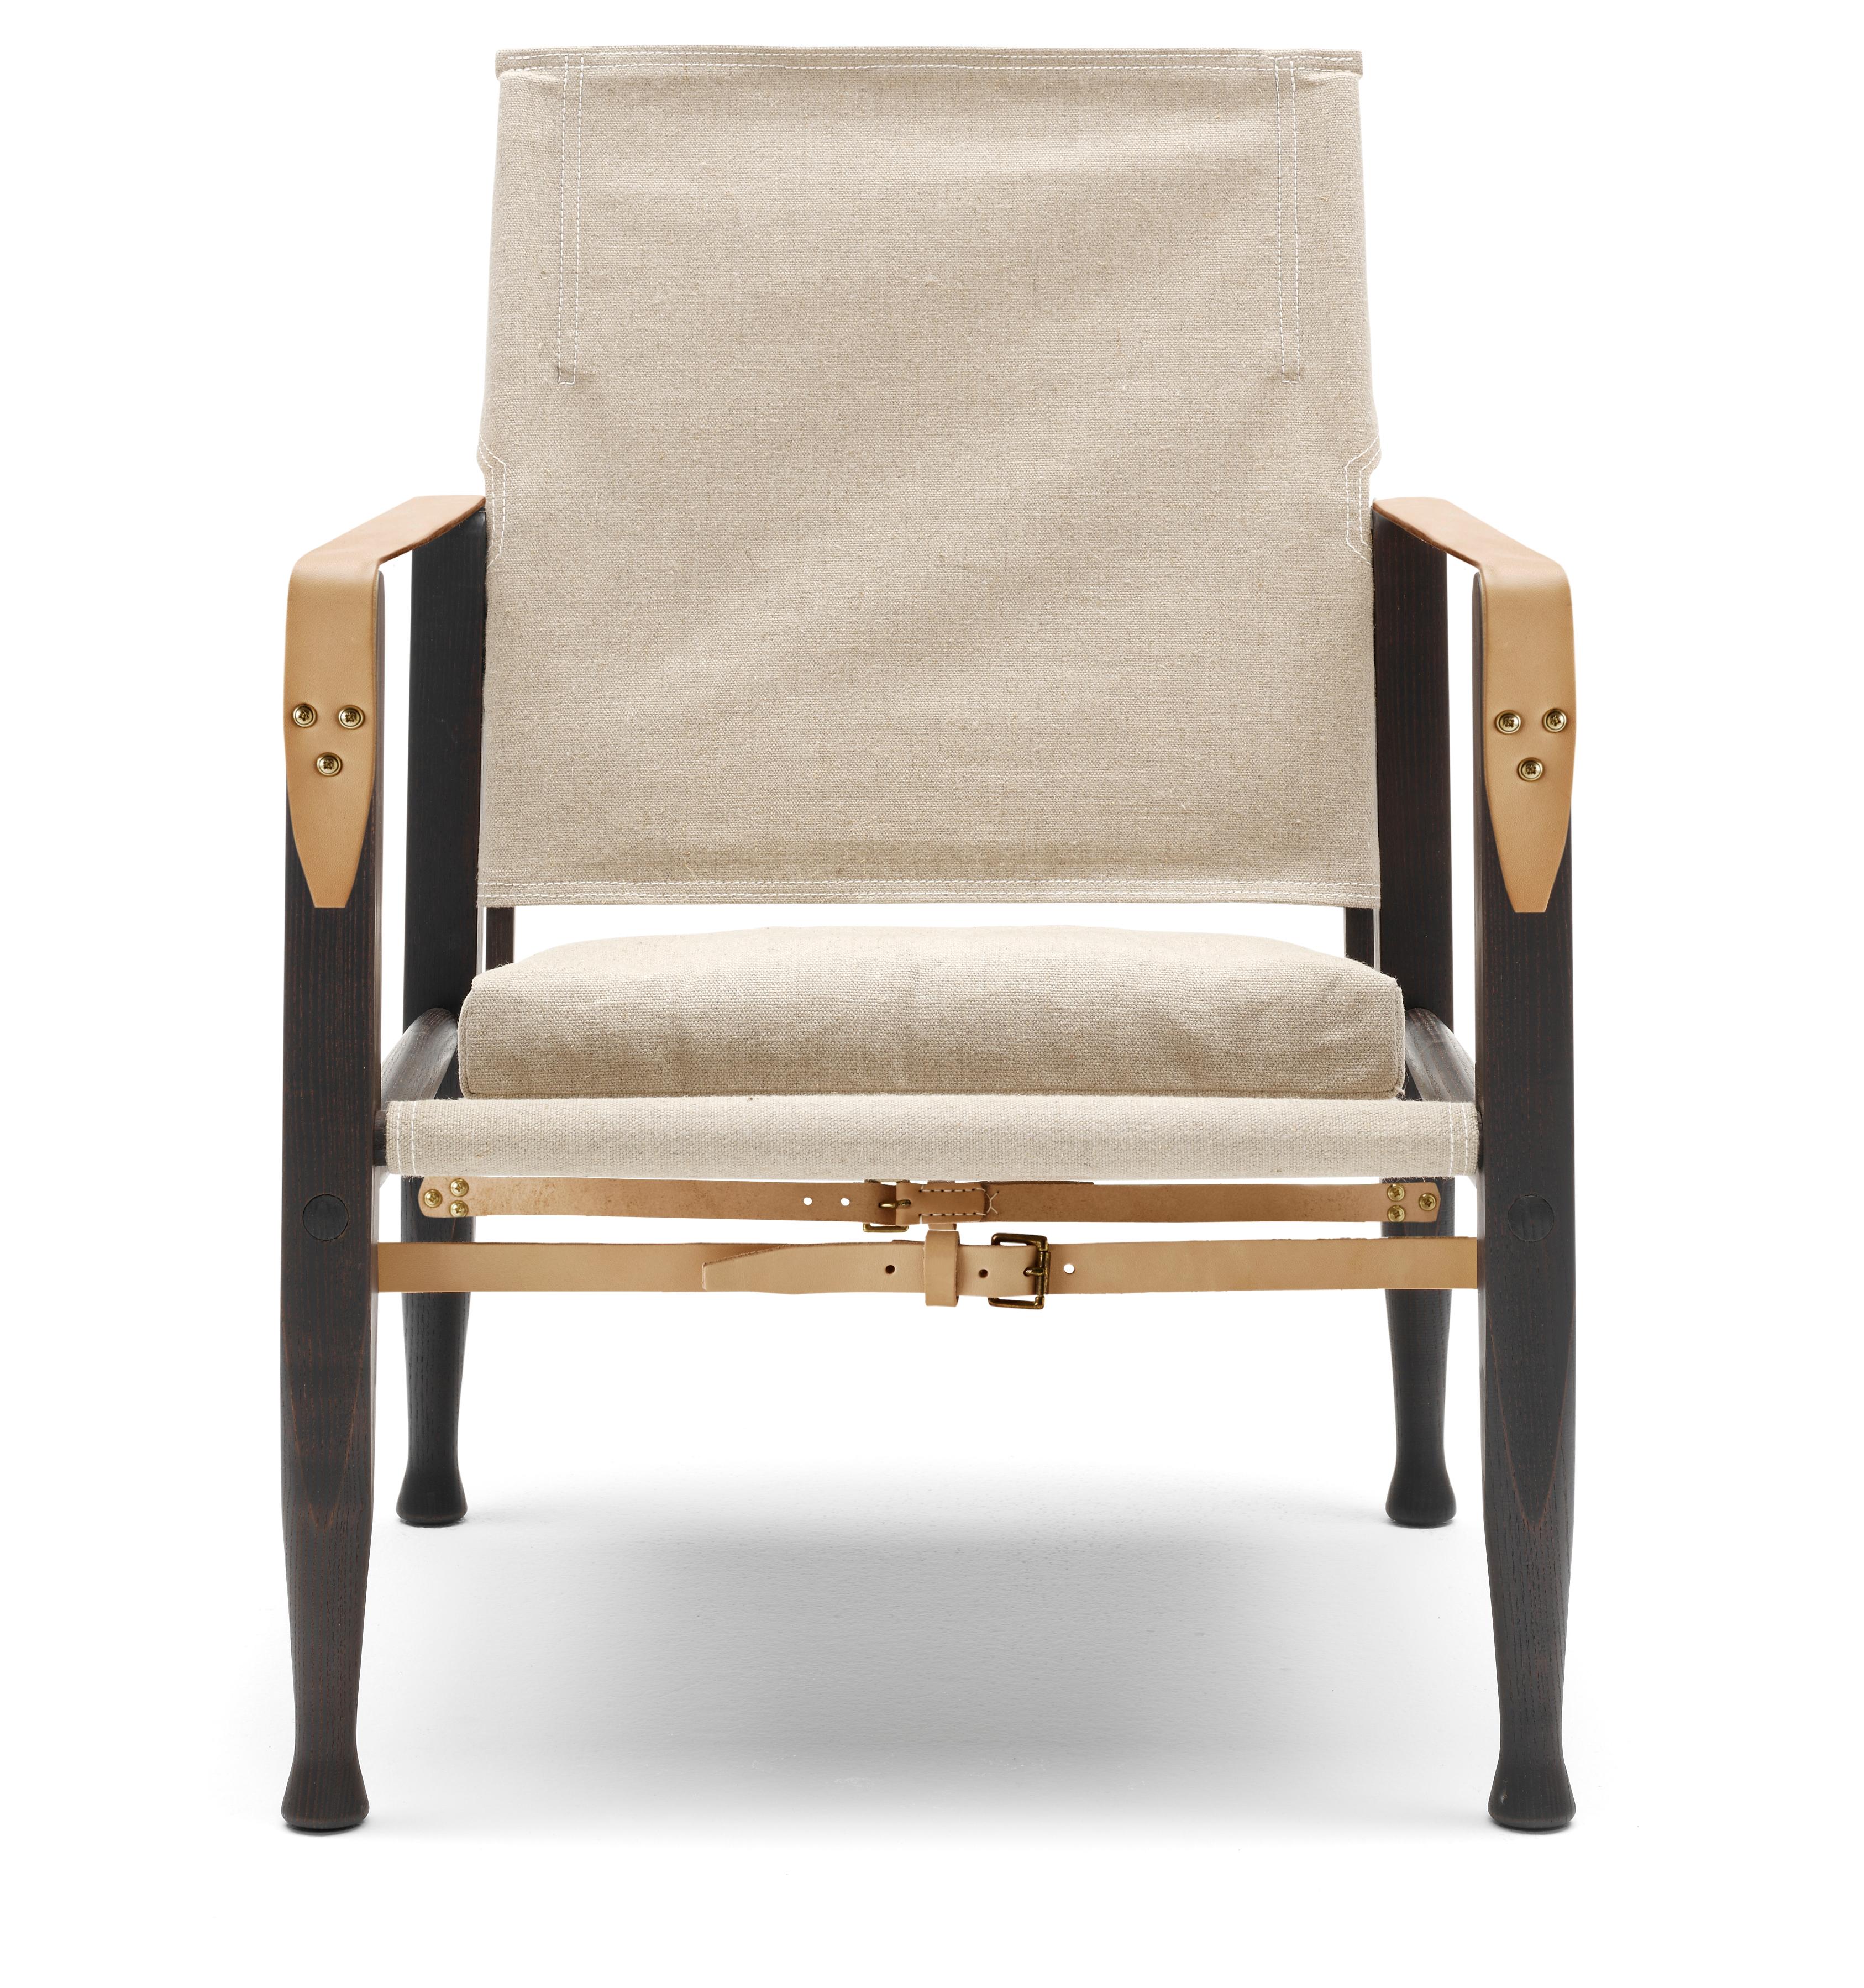 Brown (SAFARICHAIR_CANVASNATURAL) KK47000 Safari Chair in Smoked Stain by Kaare Klint